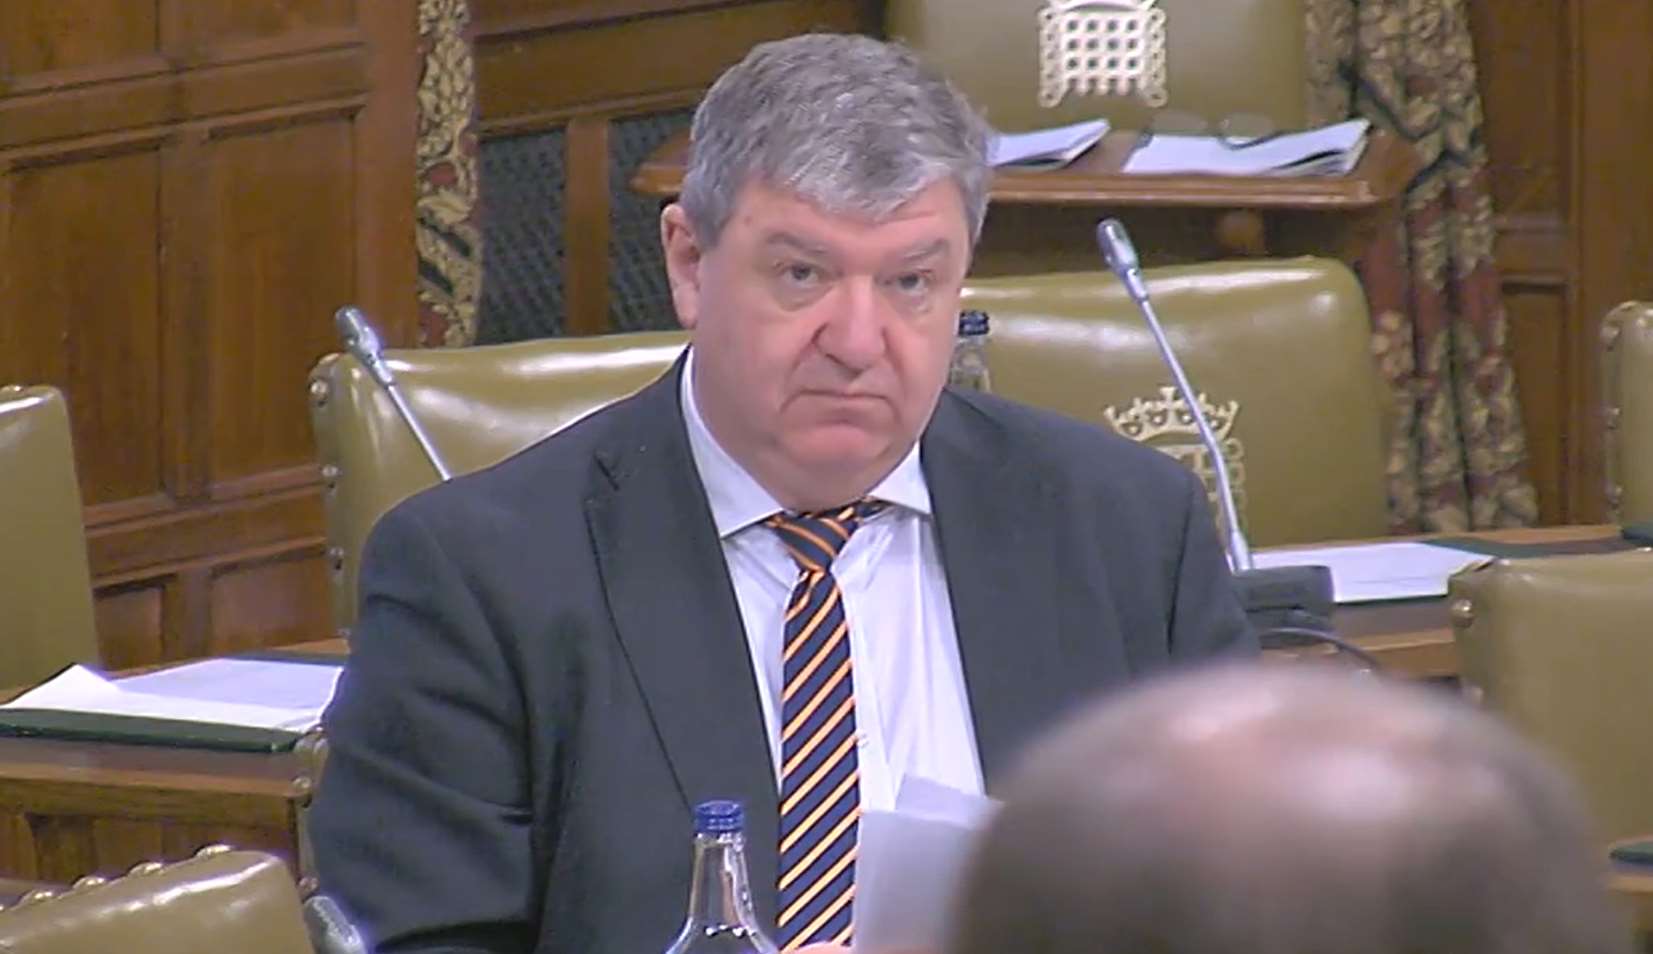 Lib Dem MP Alistair Carmichael raised concerns about BGI Group’s links to the Chinese state (UK Parliament/ Parliament TV)